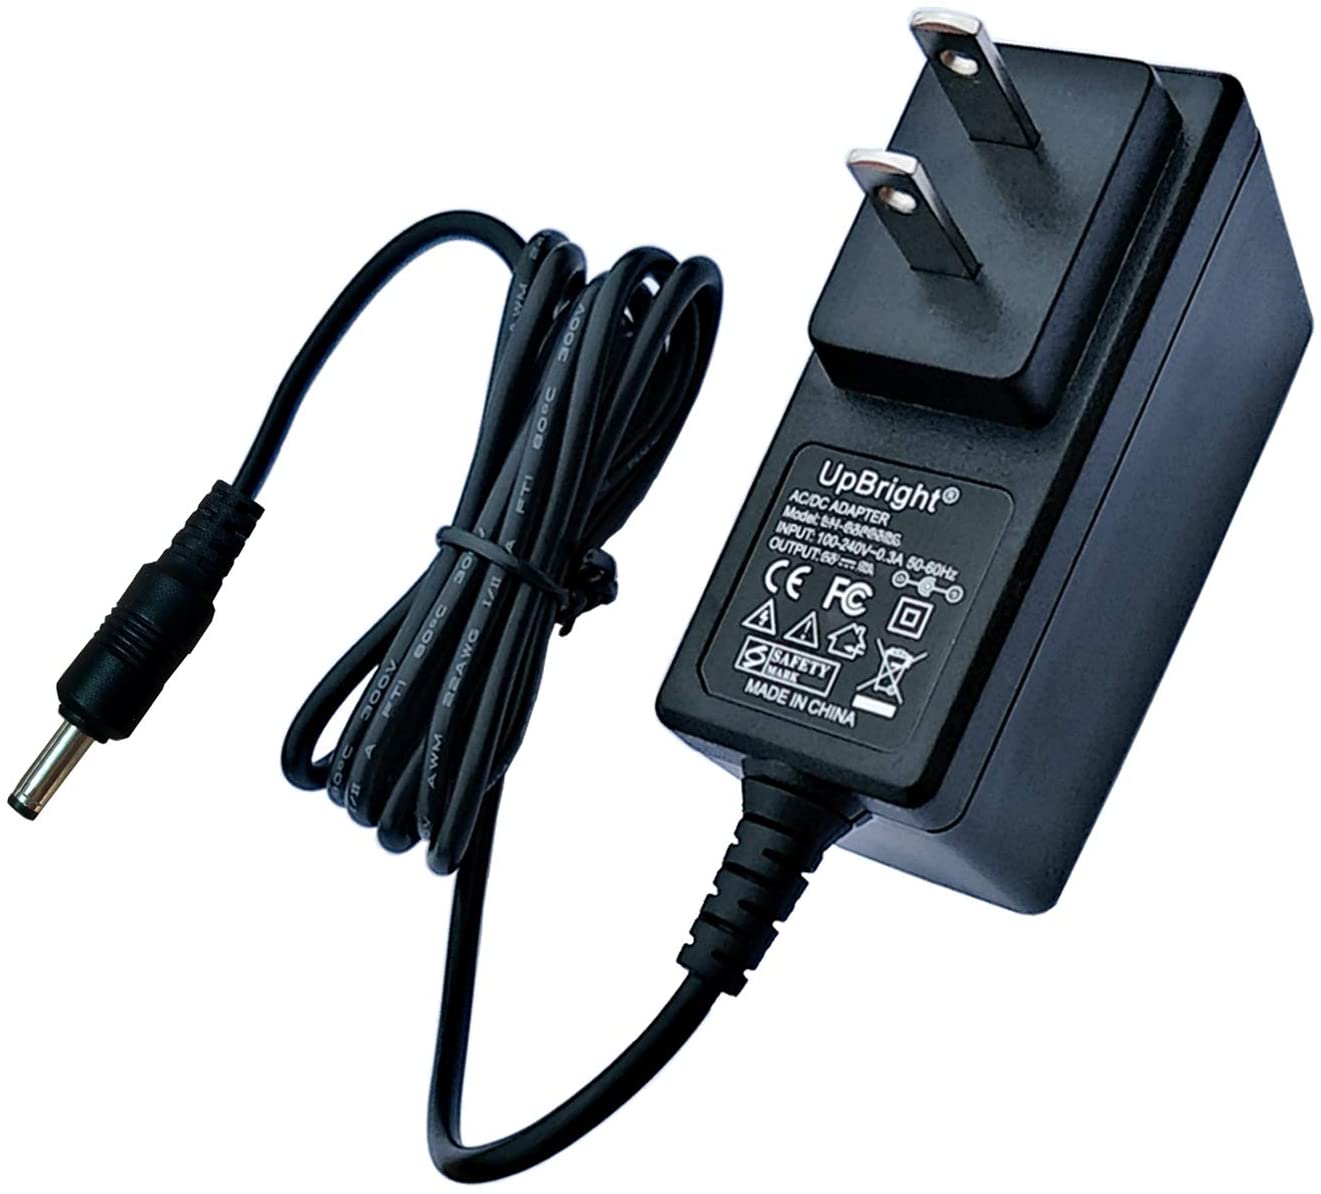 UPBRIGHT AC Adapter For NordicTrack AUDIOSTRIDER 800 Elliptical Exerciser 831.236670 831.236671 831.236672 831.236673 NTEL77060 NTEL77061 NTEL77062 Power Supply Cord + Charger - image 1 of 3